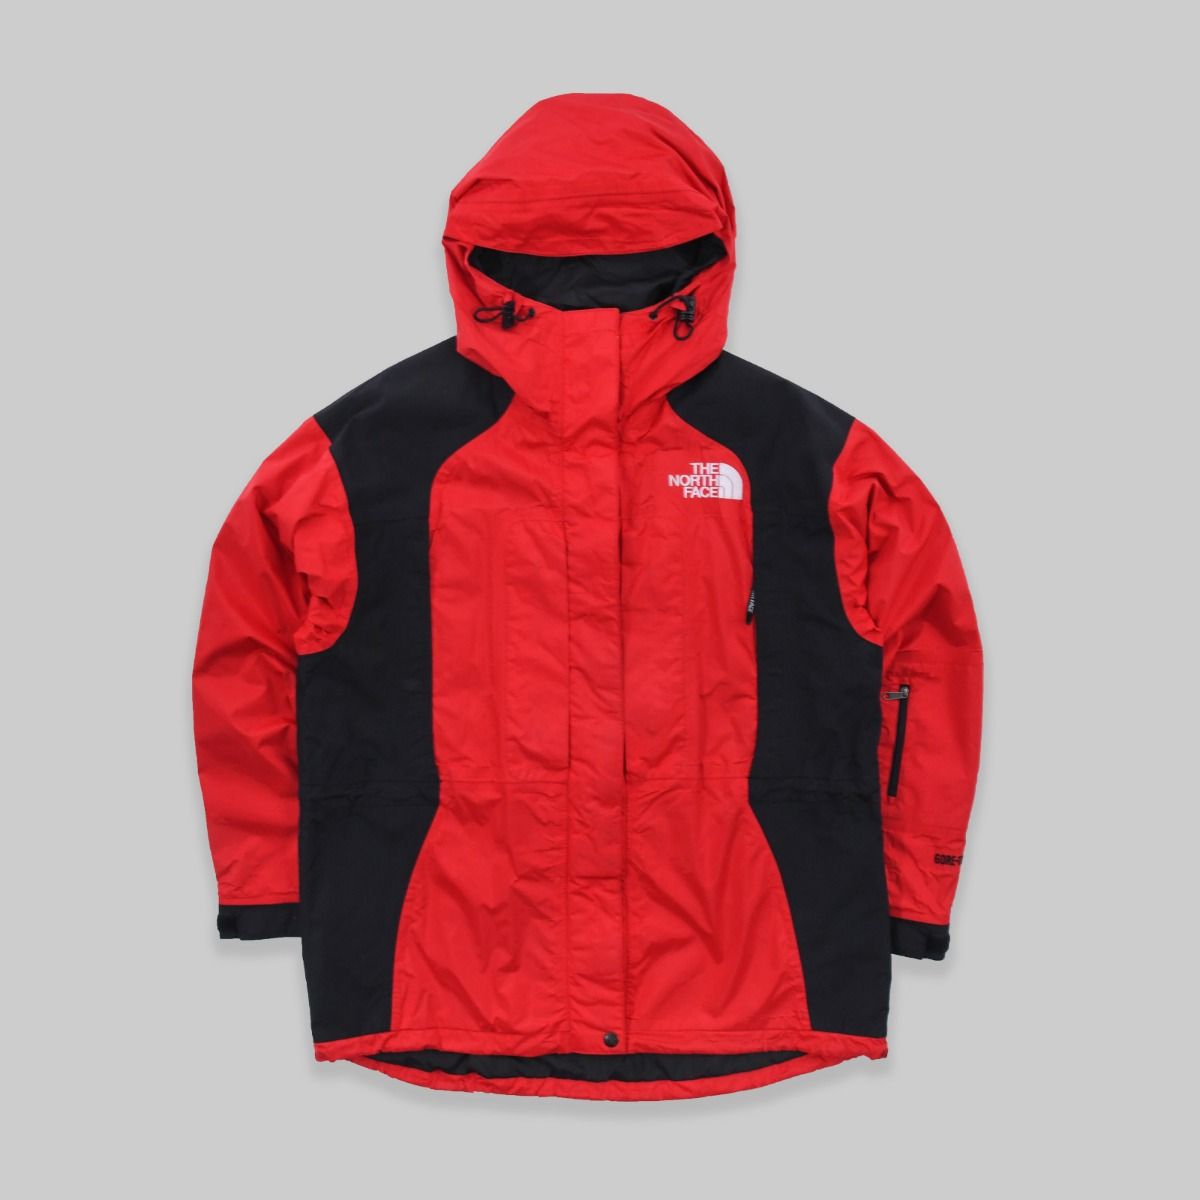 The North Face 1990s Jacket